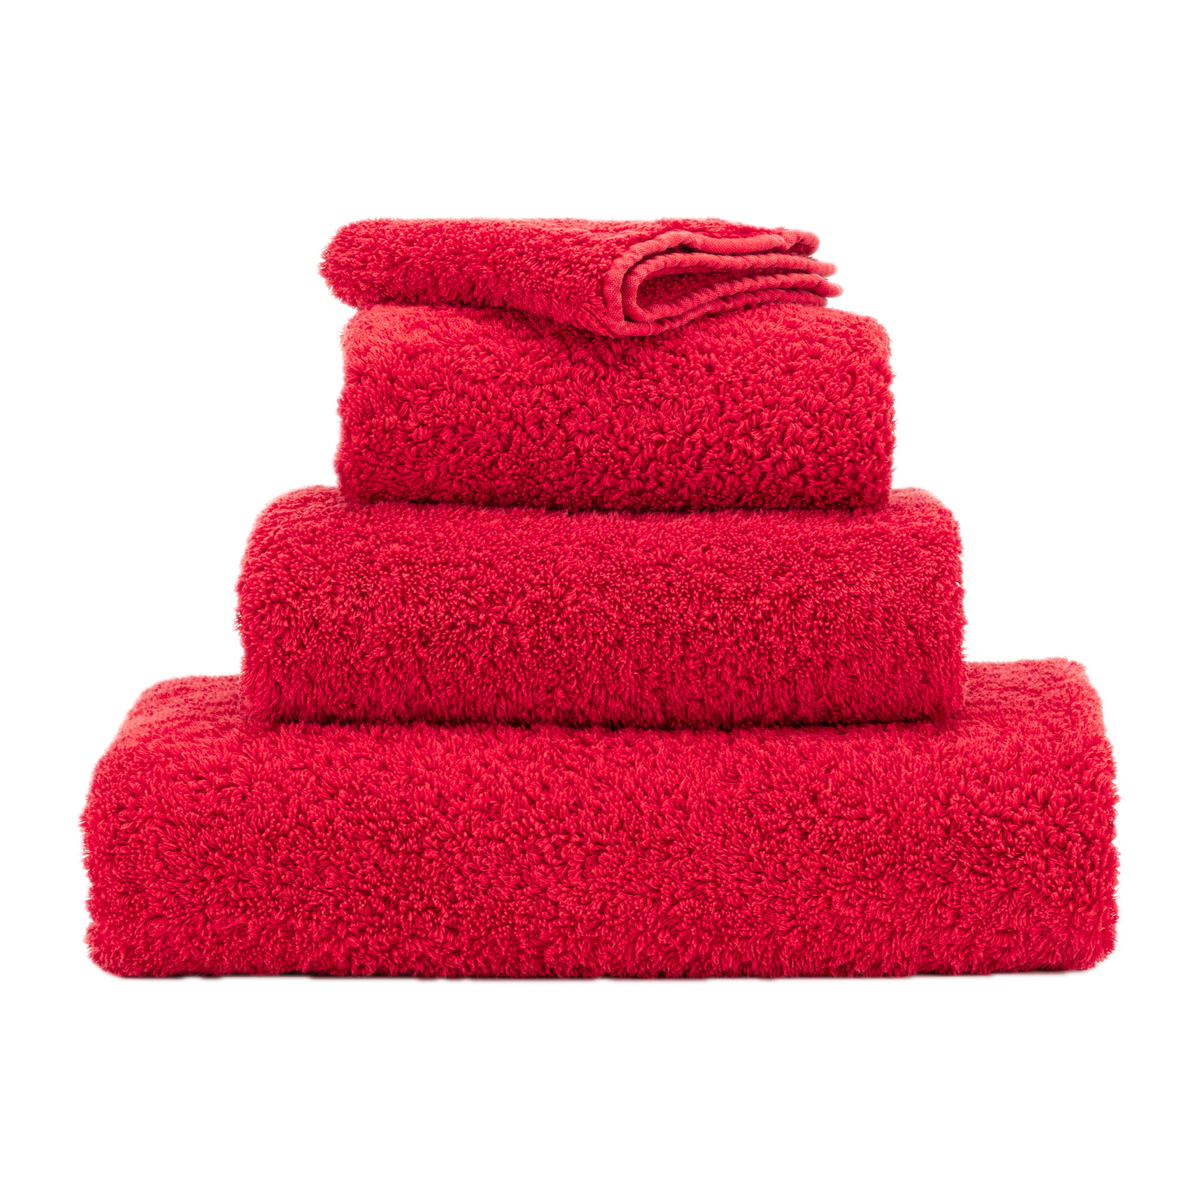 Stack of Abyss Super Pile Bath Towels in Carmin Color